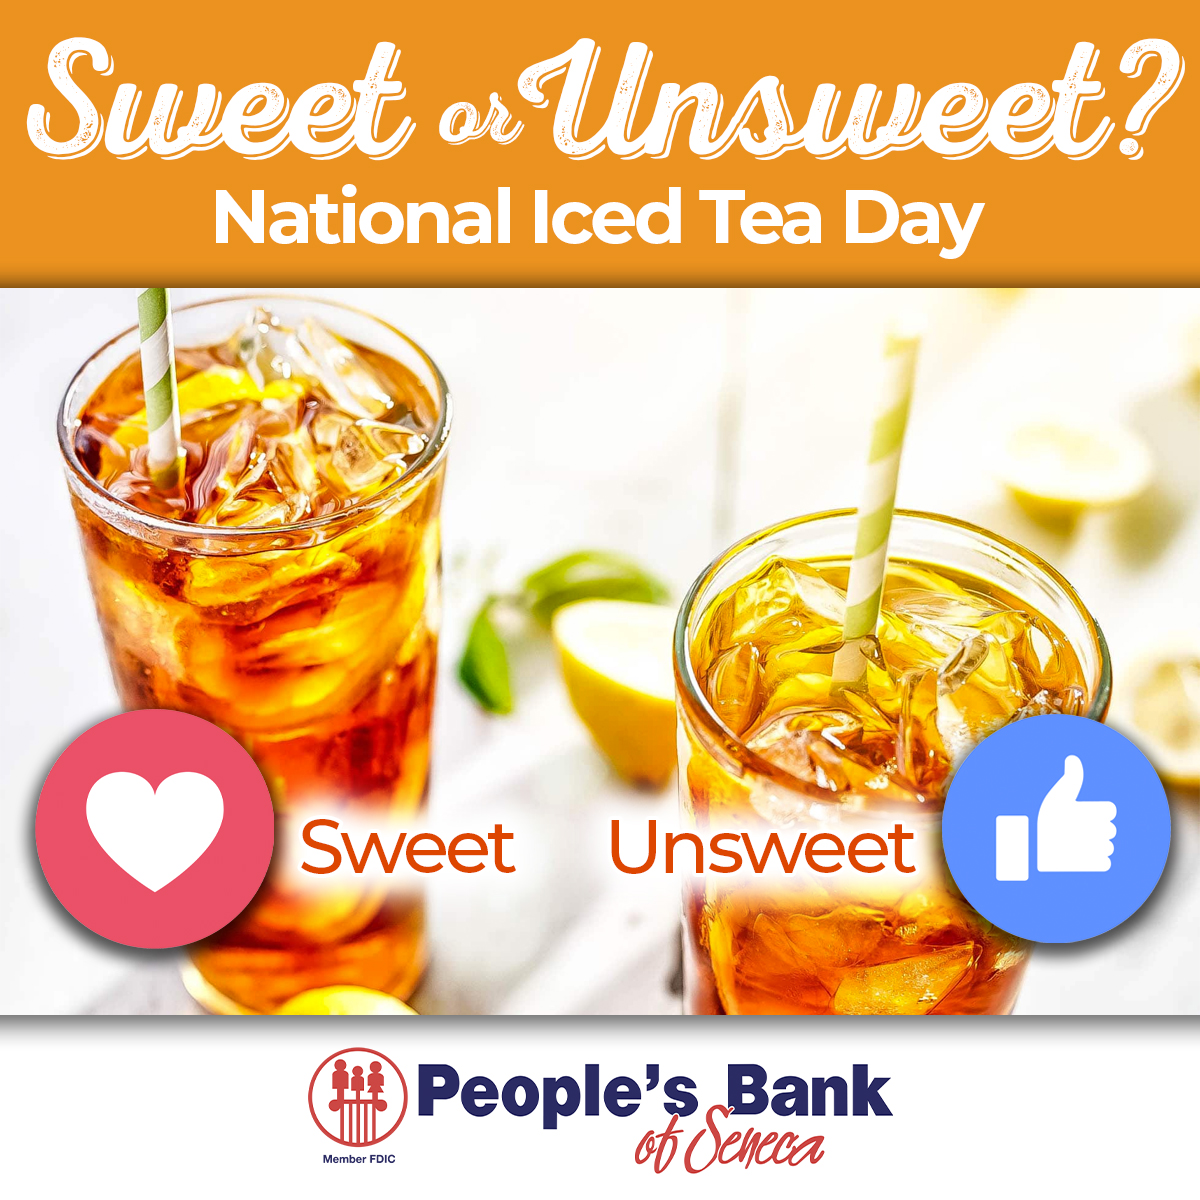 June 10th is National Iced Tea Day! Here's the ultimate question: do you prefer sweet or unsweet tea? Let us know! #IcedTeaDay #SweetTea #UnsweetTea